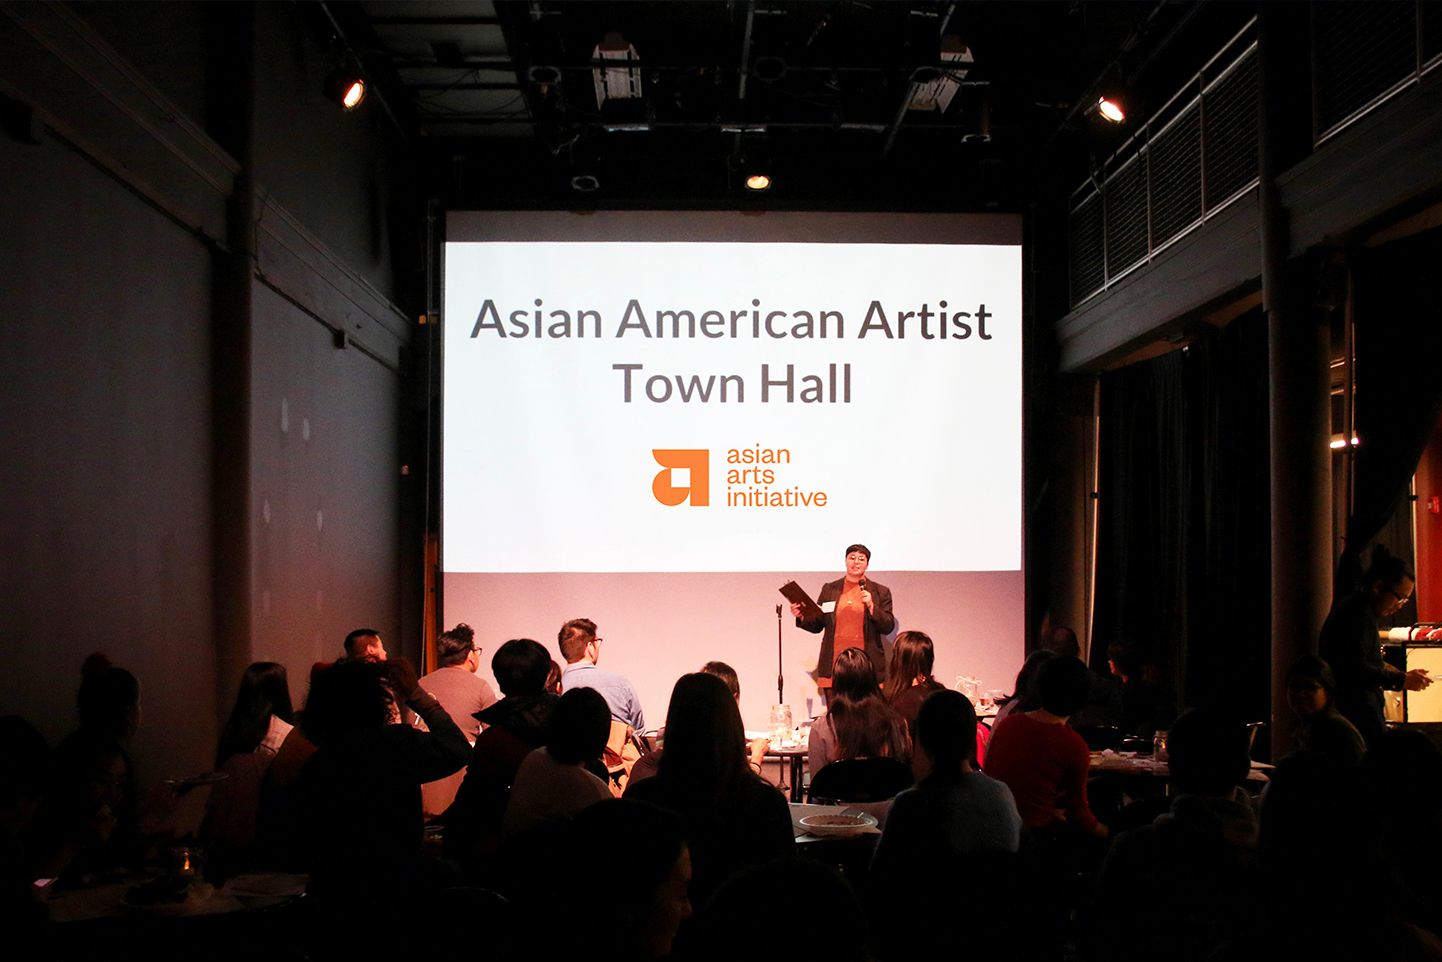 A speaker at the Asian American Artist Town Hall in front of audiences.